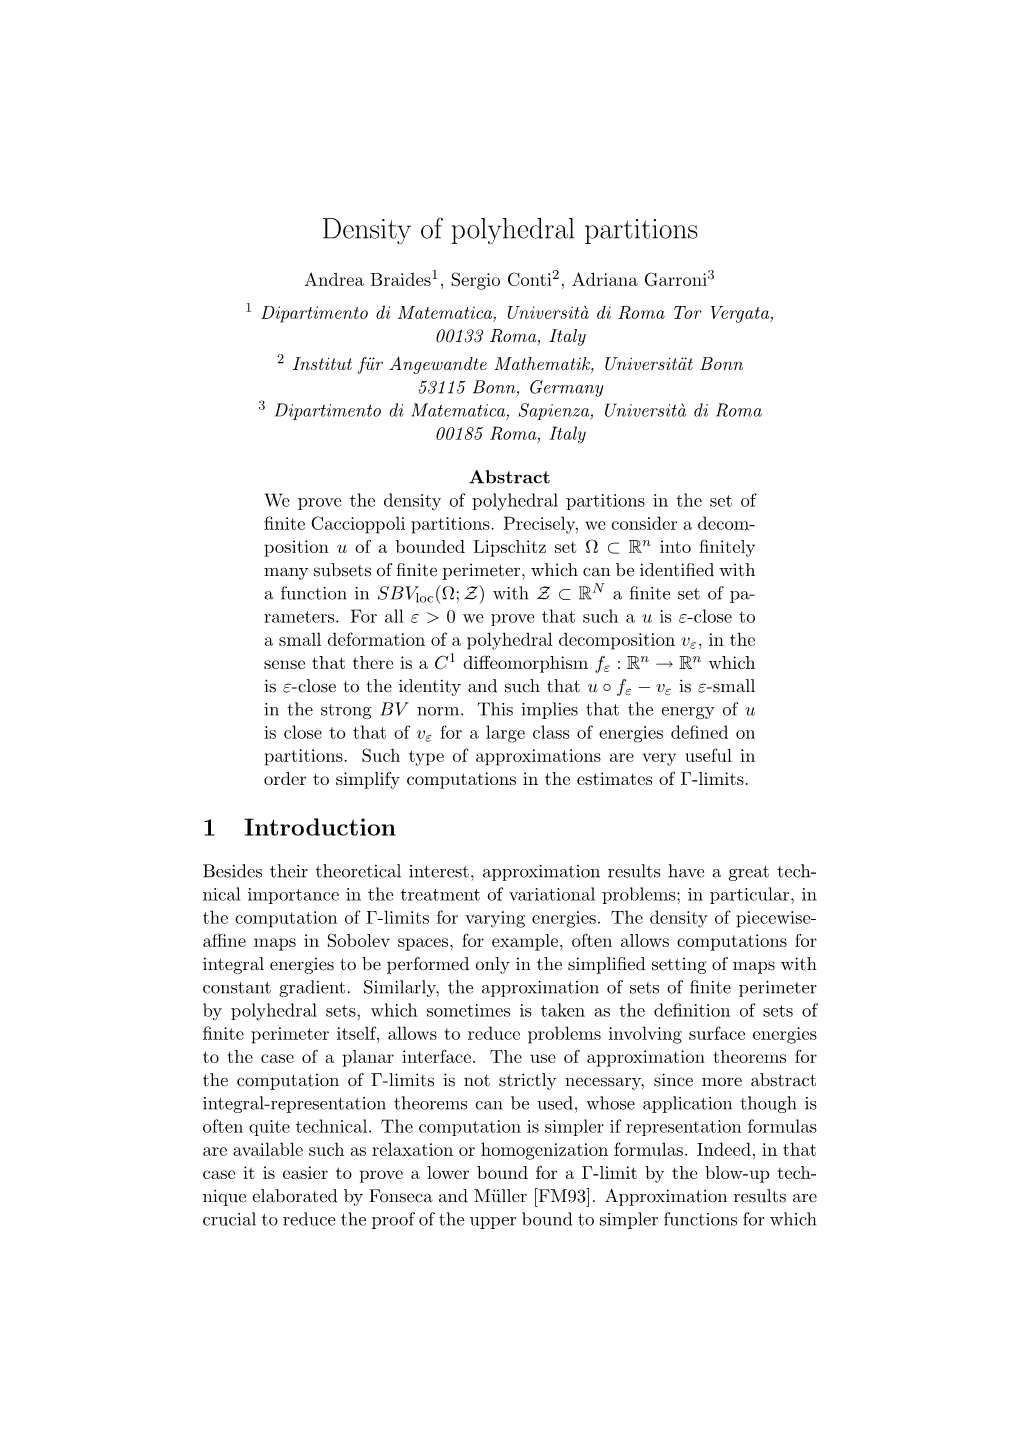 Density of Polyhedral Partitions